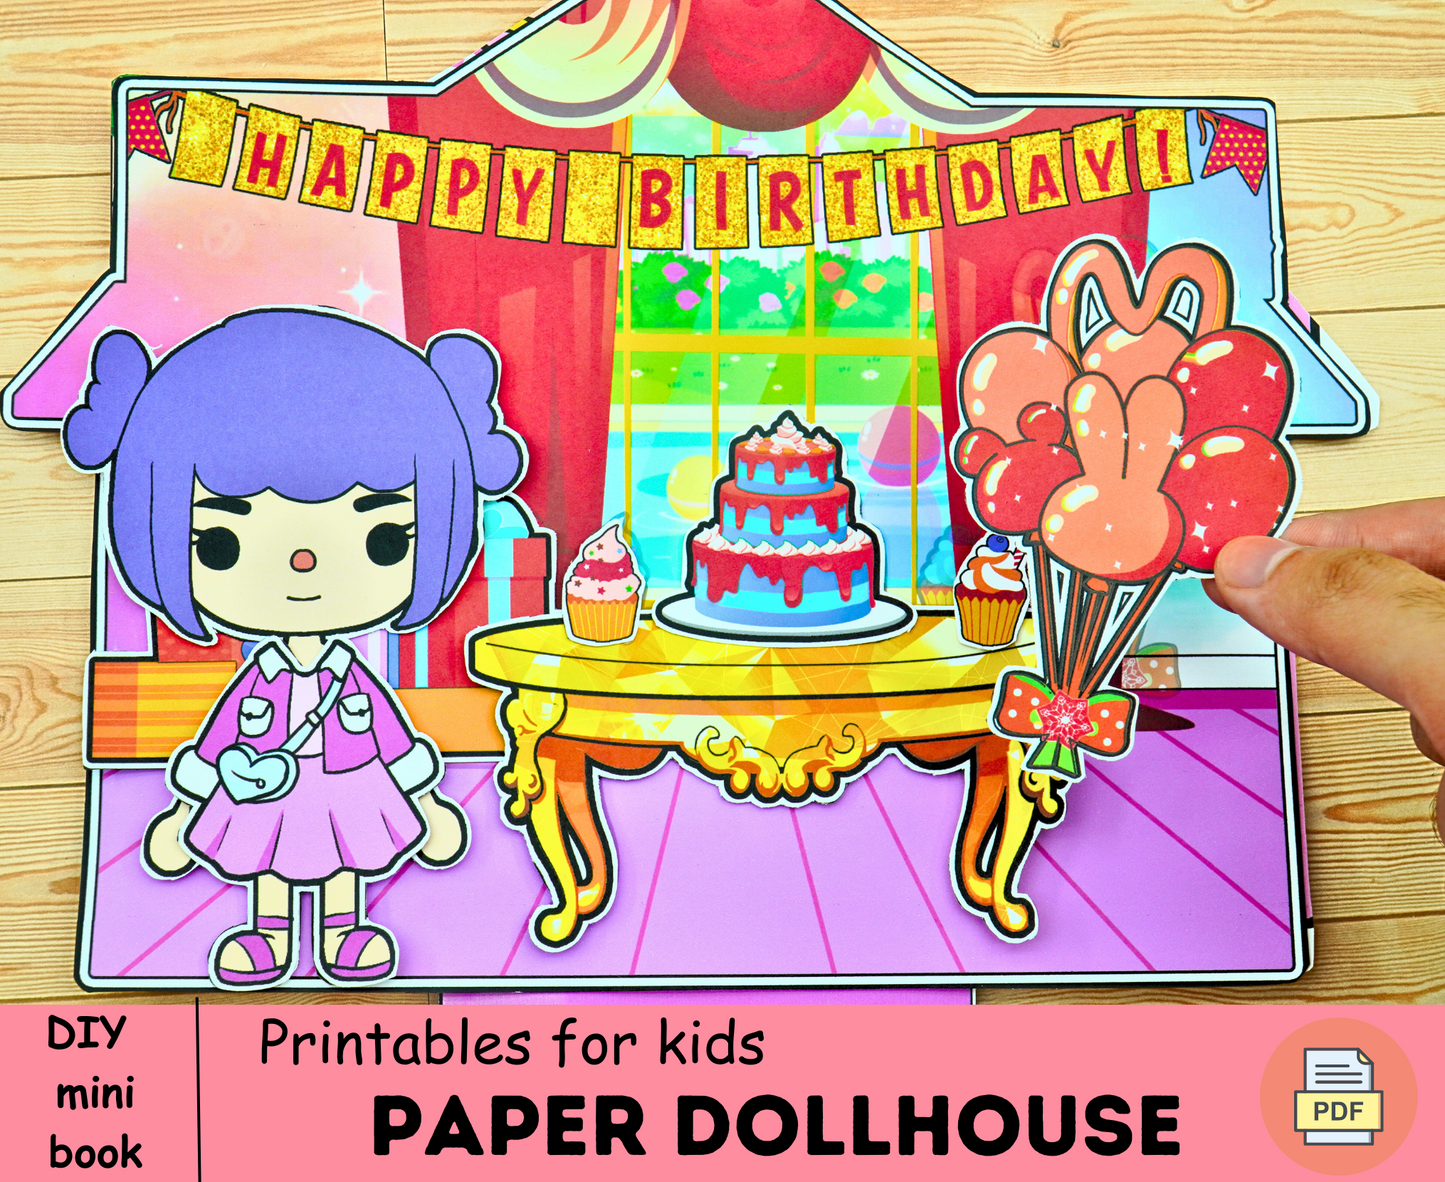 Toca Boca Birthday Party Busy book printable 🌈 Toca Boca Life activities book to print, Transparent Background | Instant DownloadDreambox 🌈 Woa Doll Crafts